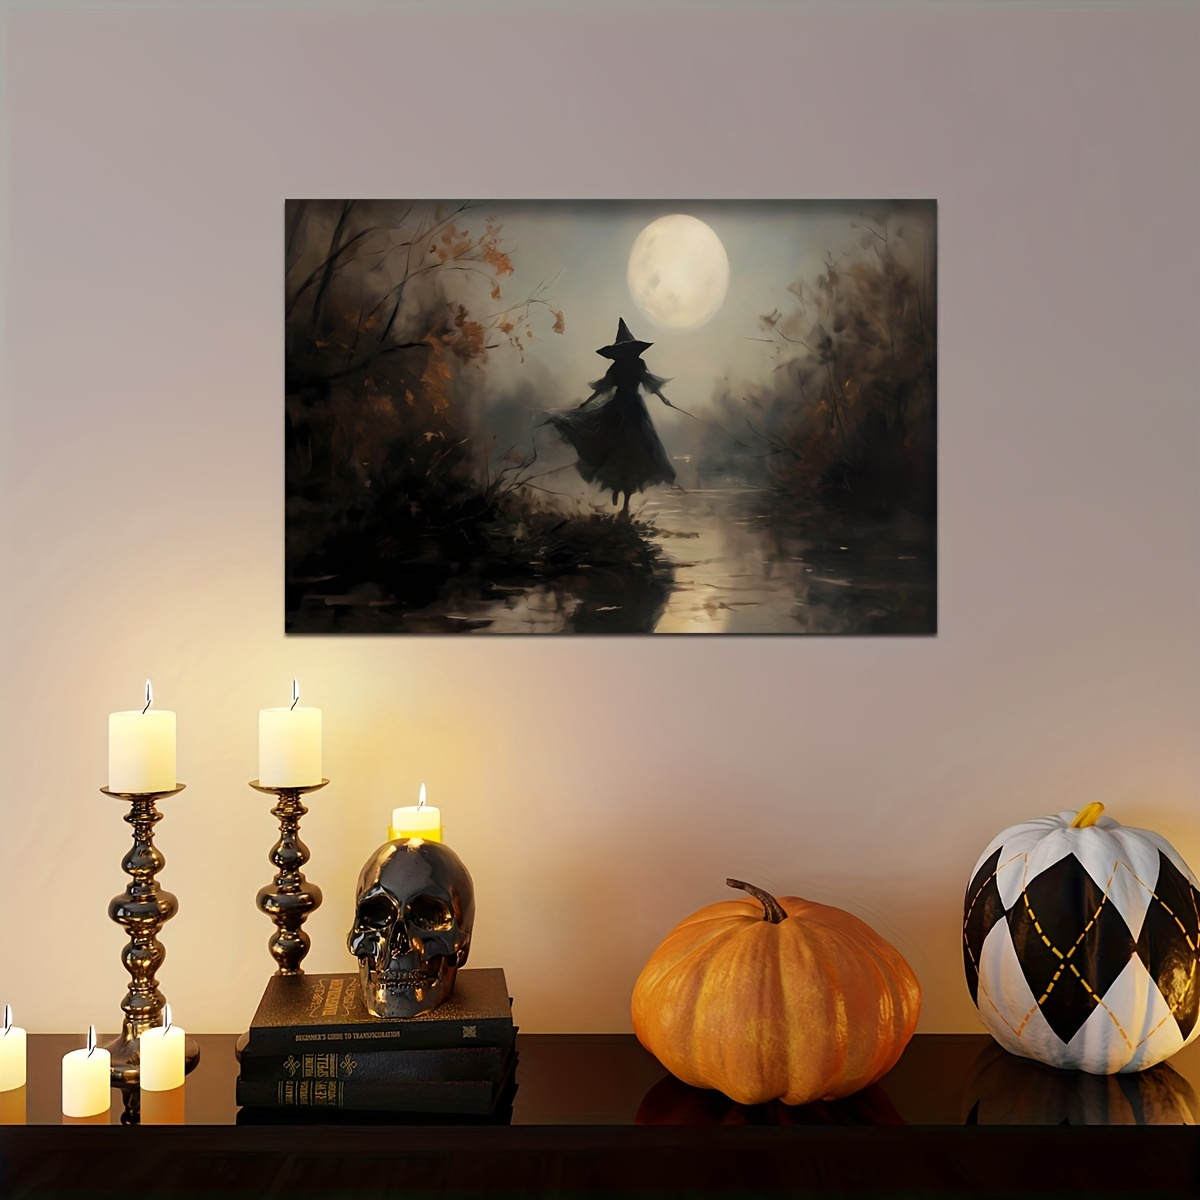 Goth Decor - Gothic Wall Art - Halloween Wall Decor - Witch Witchy Poster  Print - Vintage Scary Creepy Pictures for Bathroom - Spooky Weirdo Satanic